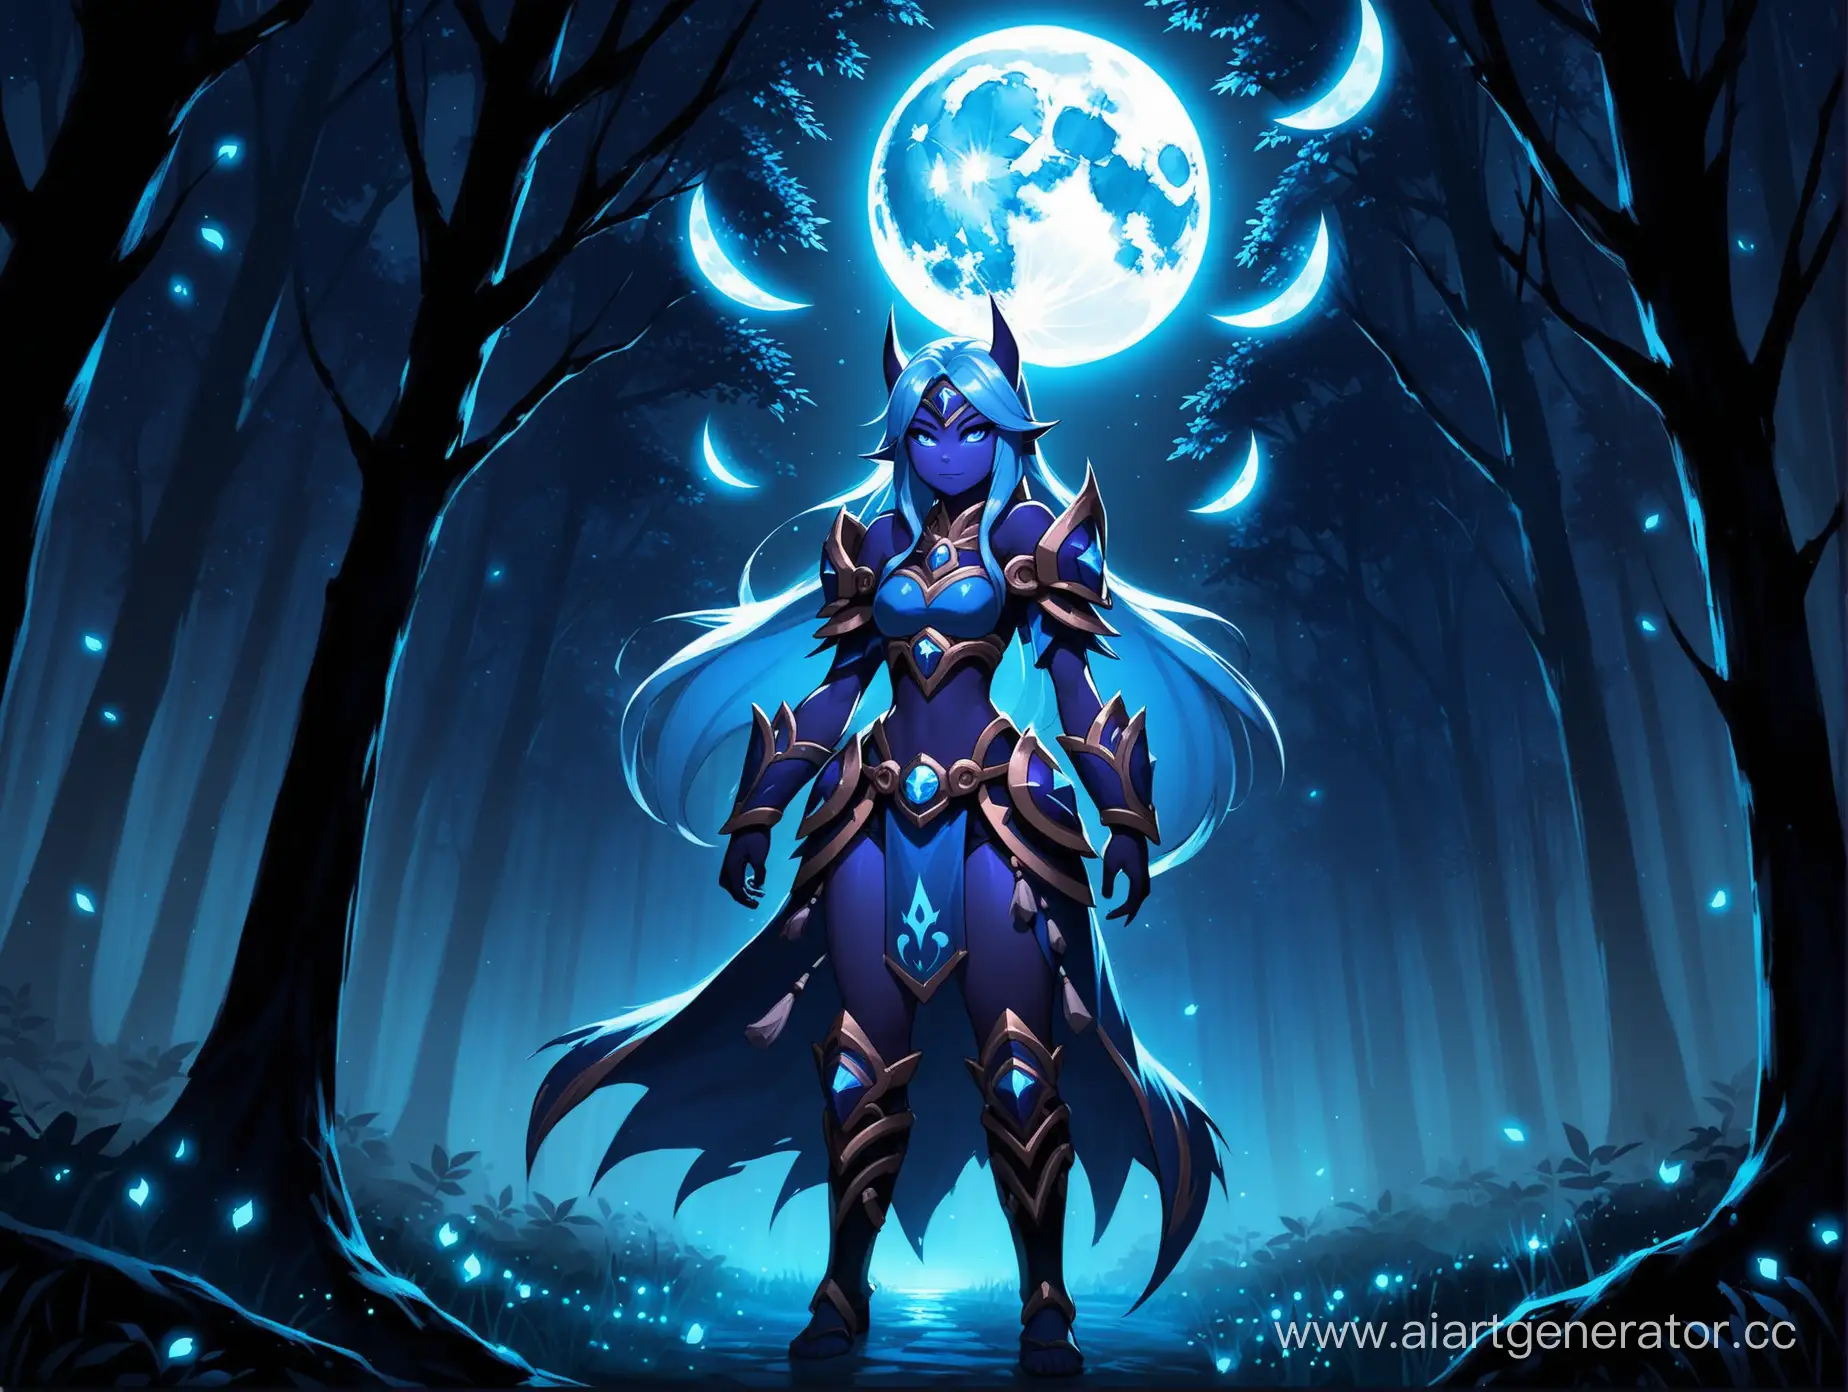 Luna from dota 2 in the dark forest with a shining moon